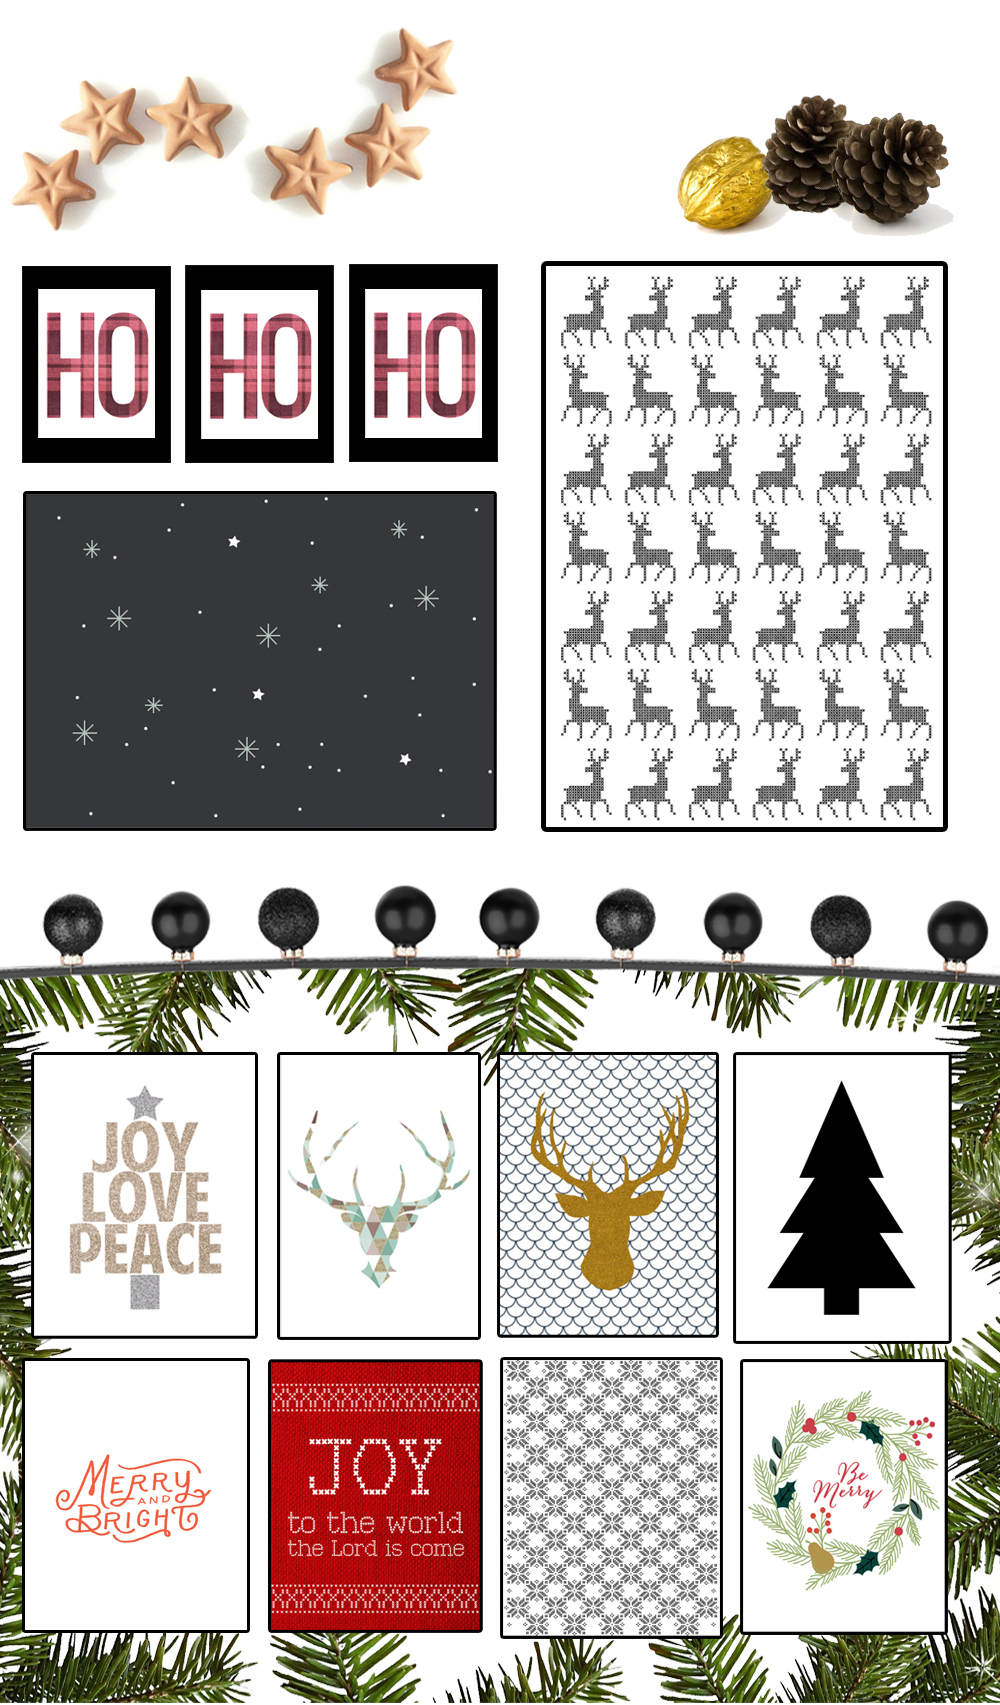 Free Christmas Printables to Spiffy Up Your Holiday Decor • littlegoldpixel.com • 35+ stylish, modern, minimal holiday finds!